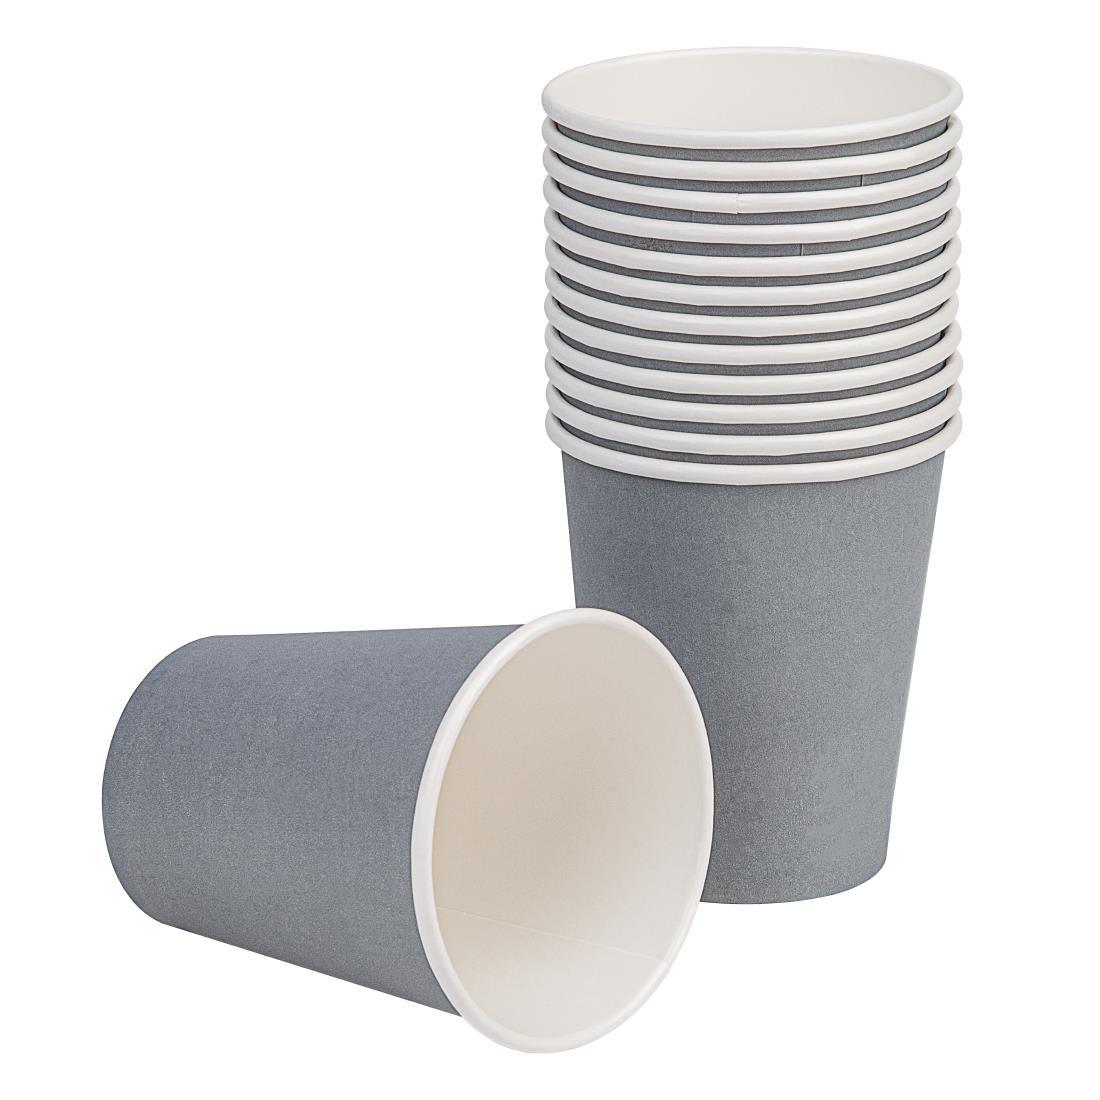 Charcoal Grey Single Wall 8oz Recyclable Hot Cups Fiesta - Case: 50 - GP412 - 2